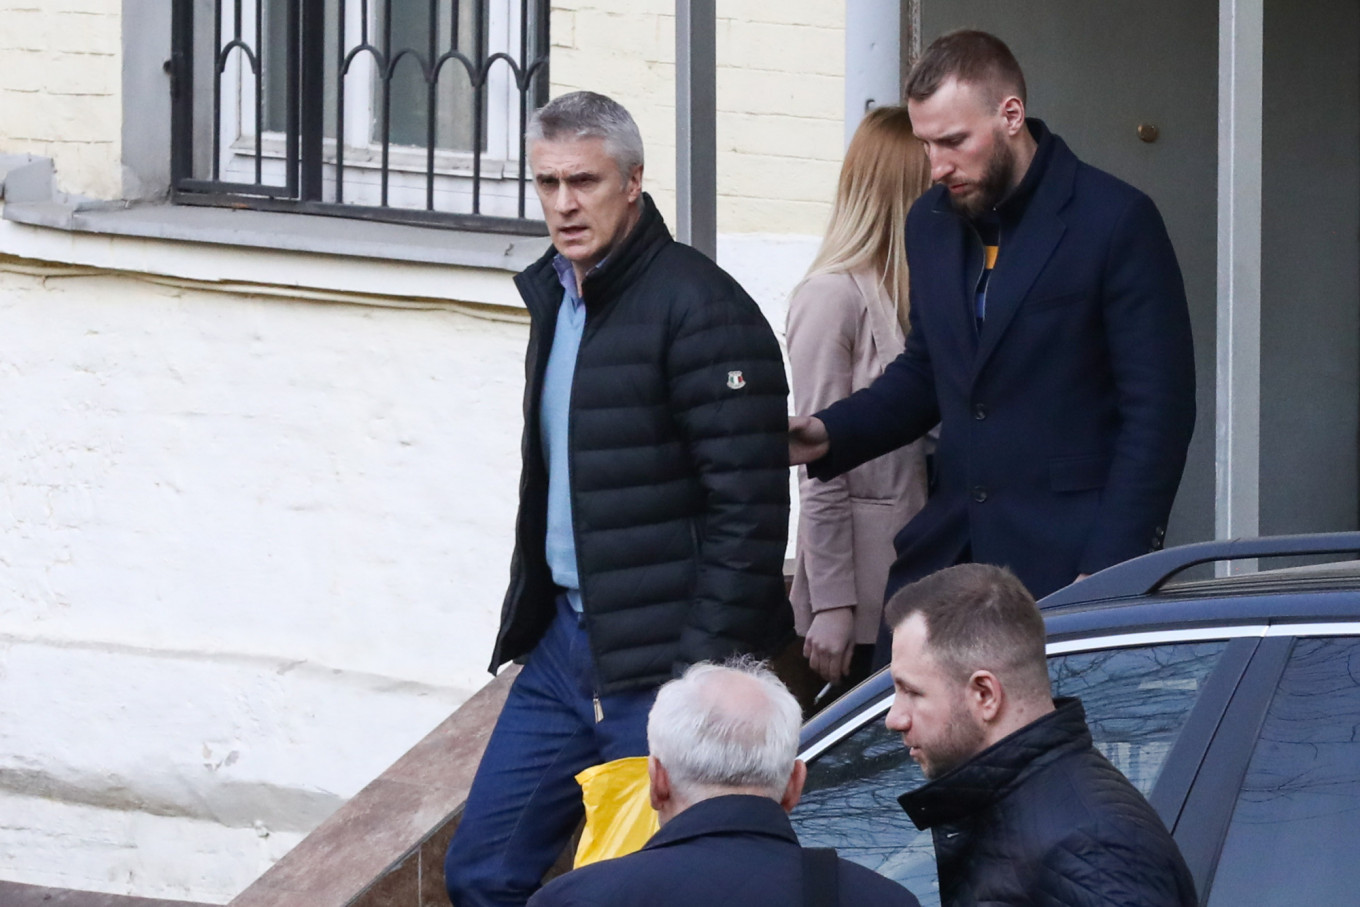 Moscow Court Releases U.S. Investor Calvey on House Arrest